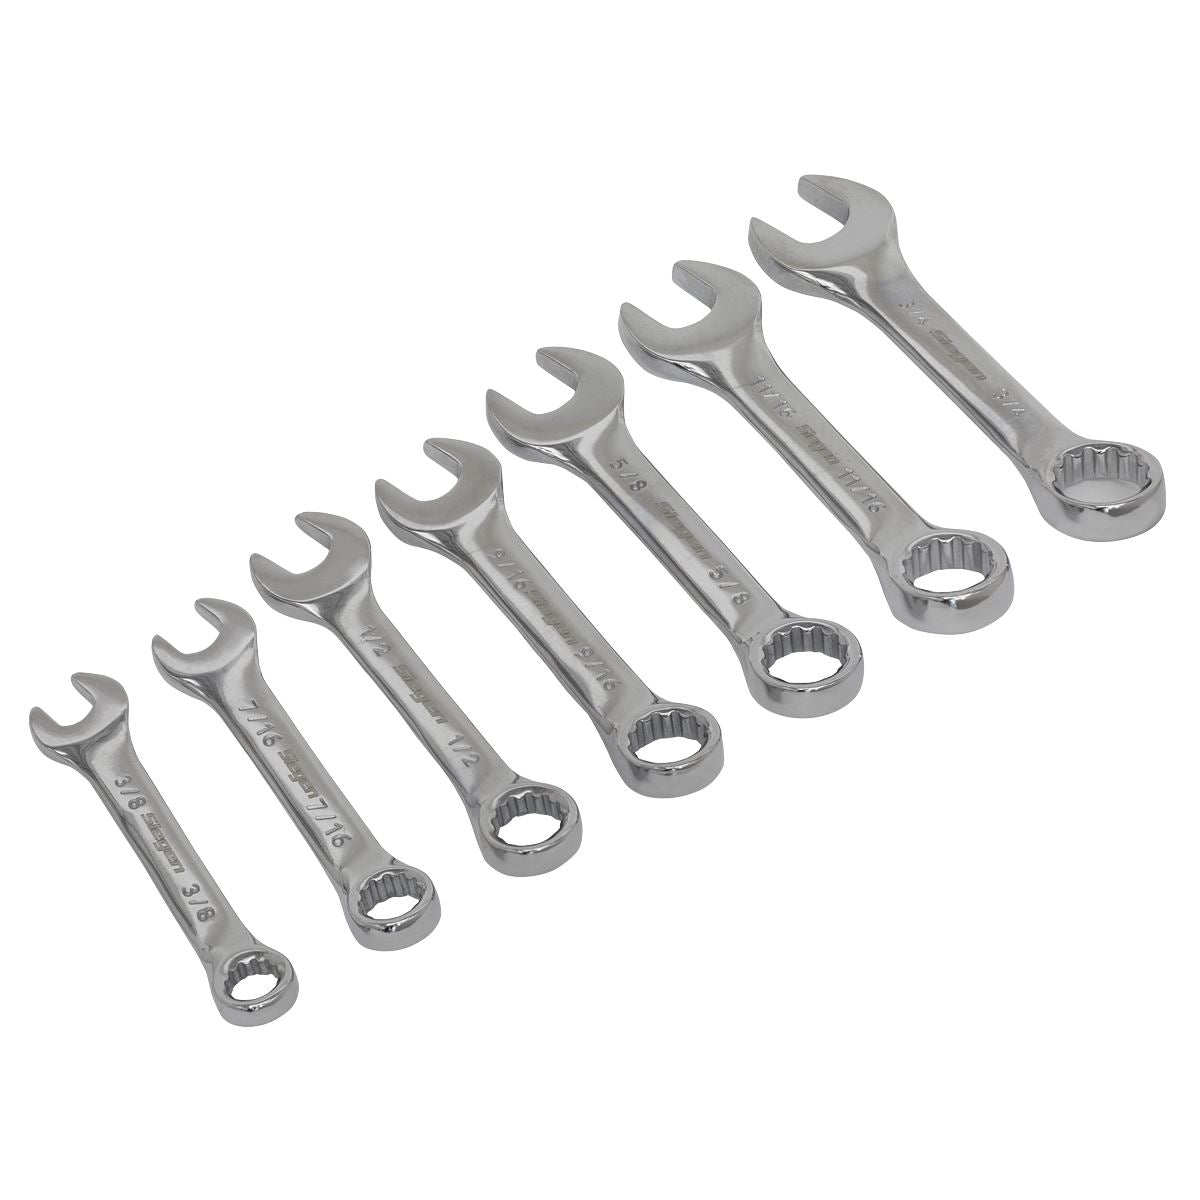 Siegen by Sealey Combination Spanner Set 7pc Stubby Imperial